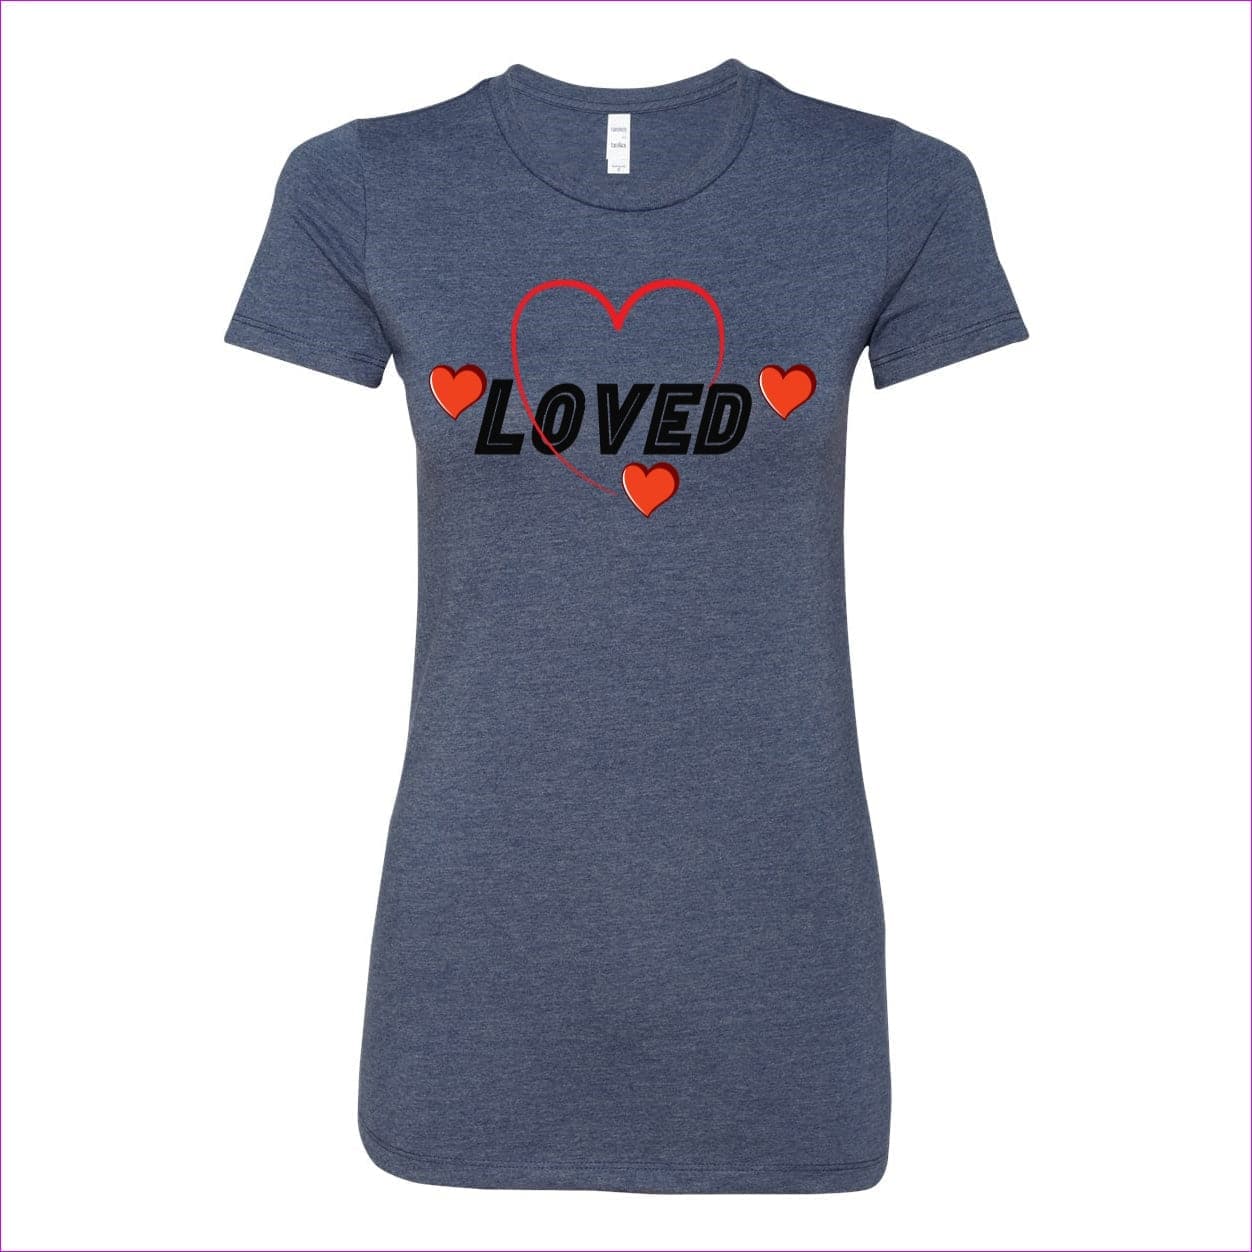 Heather Navy Loved Womens Favorite Tee - women's t-shirt at TFC&H Co.